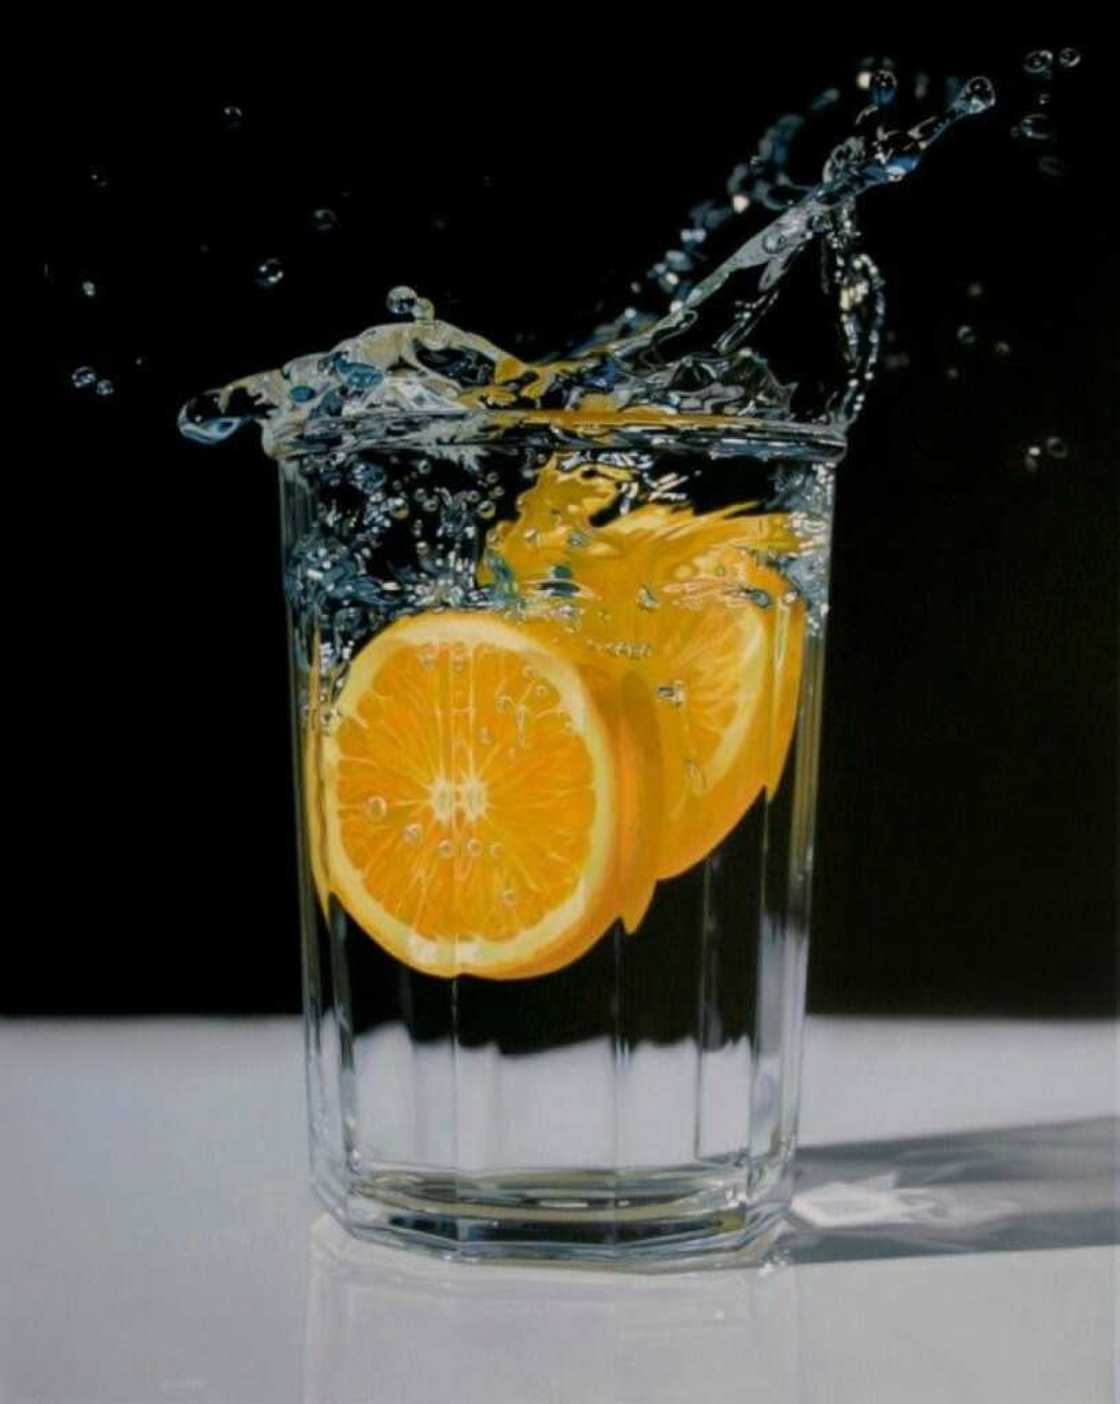 Most realistic painting in the world